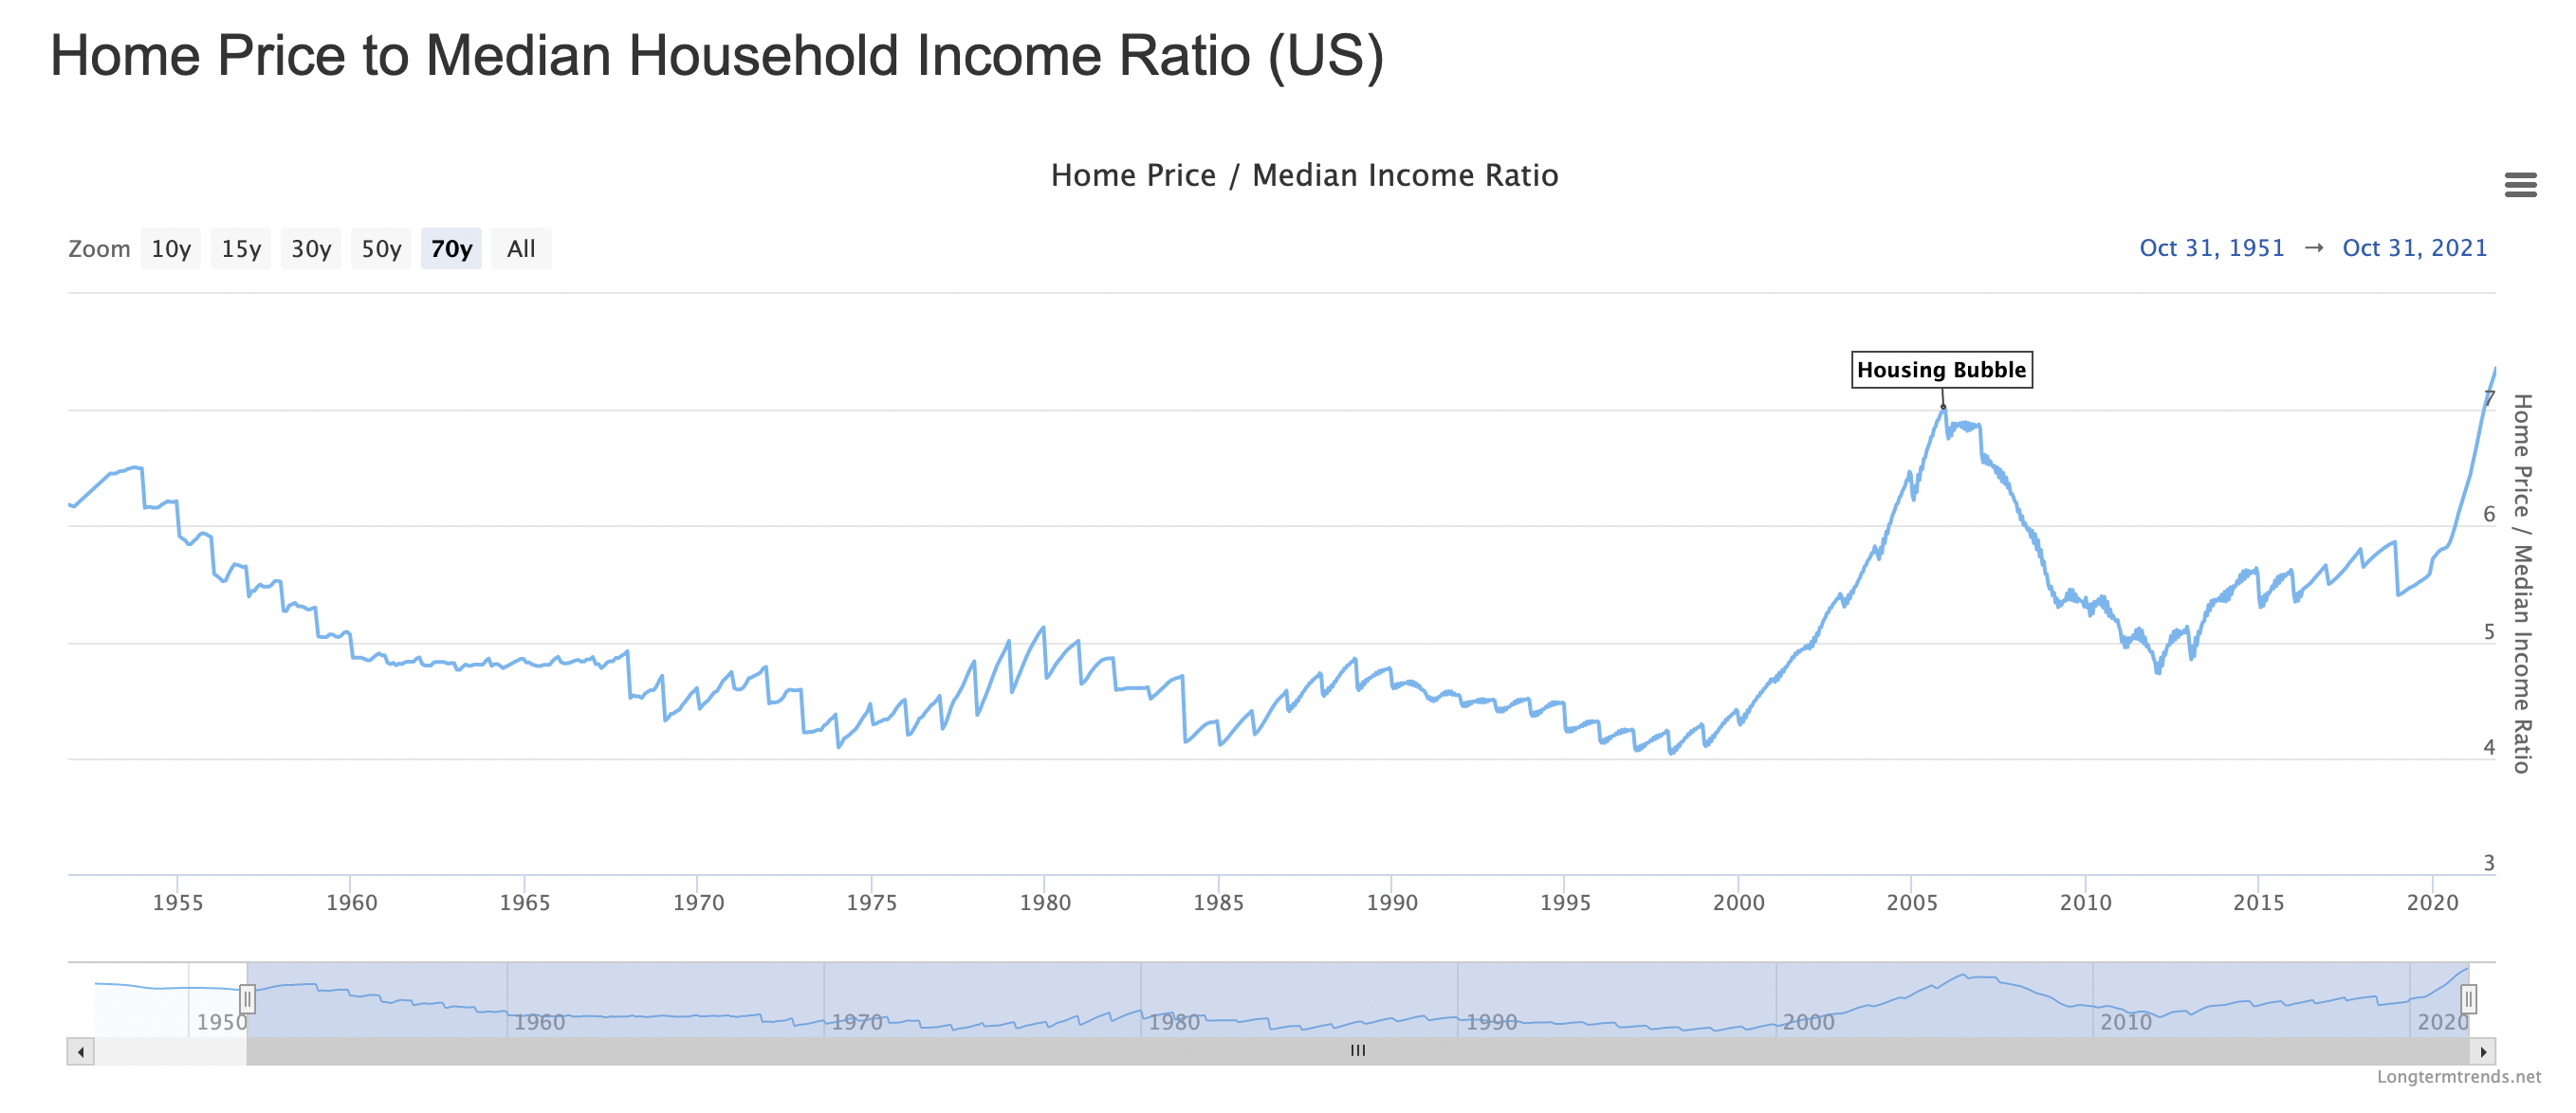 https://www.longtermtrends.net/home-price-median-annual-income-ratio/